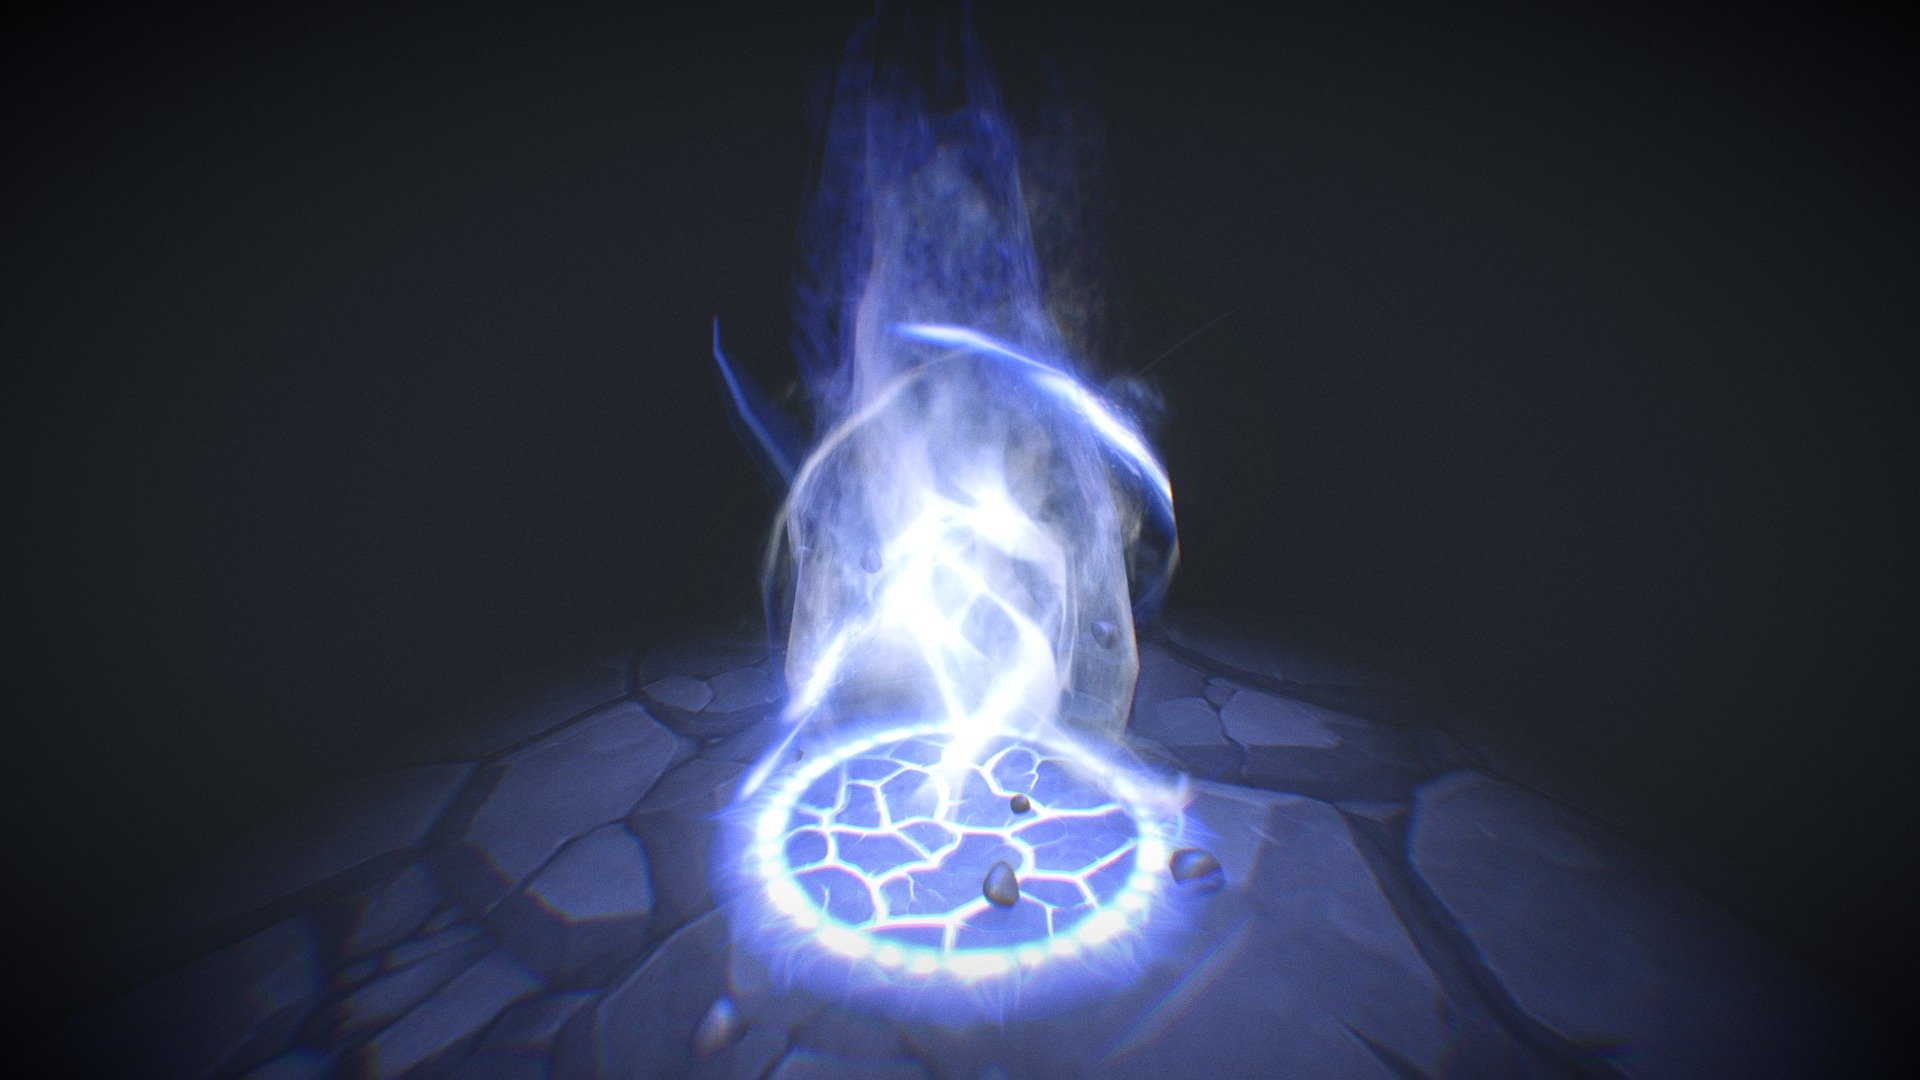 Fantasy roleplaying game visual effect test, blue flames and stone particles.

Software: 3ds Max 20, Photoshop CS6, Krita - Blue Fire Game FX - 3D model by Kafu Design (@kafudesign) 3d model